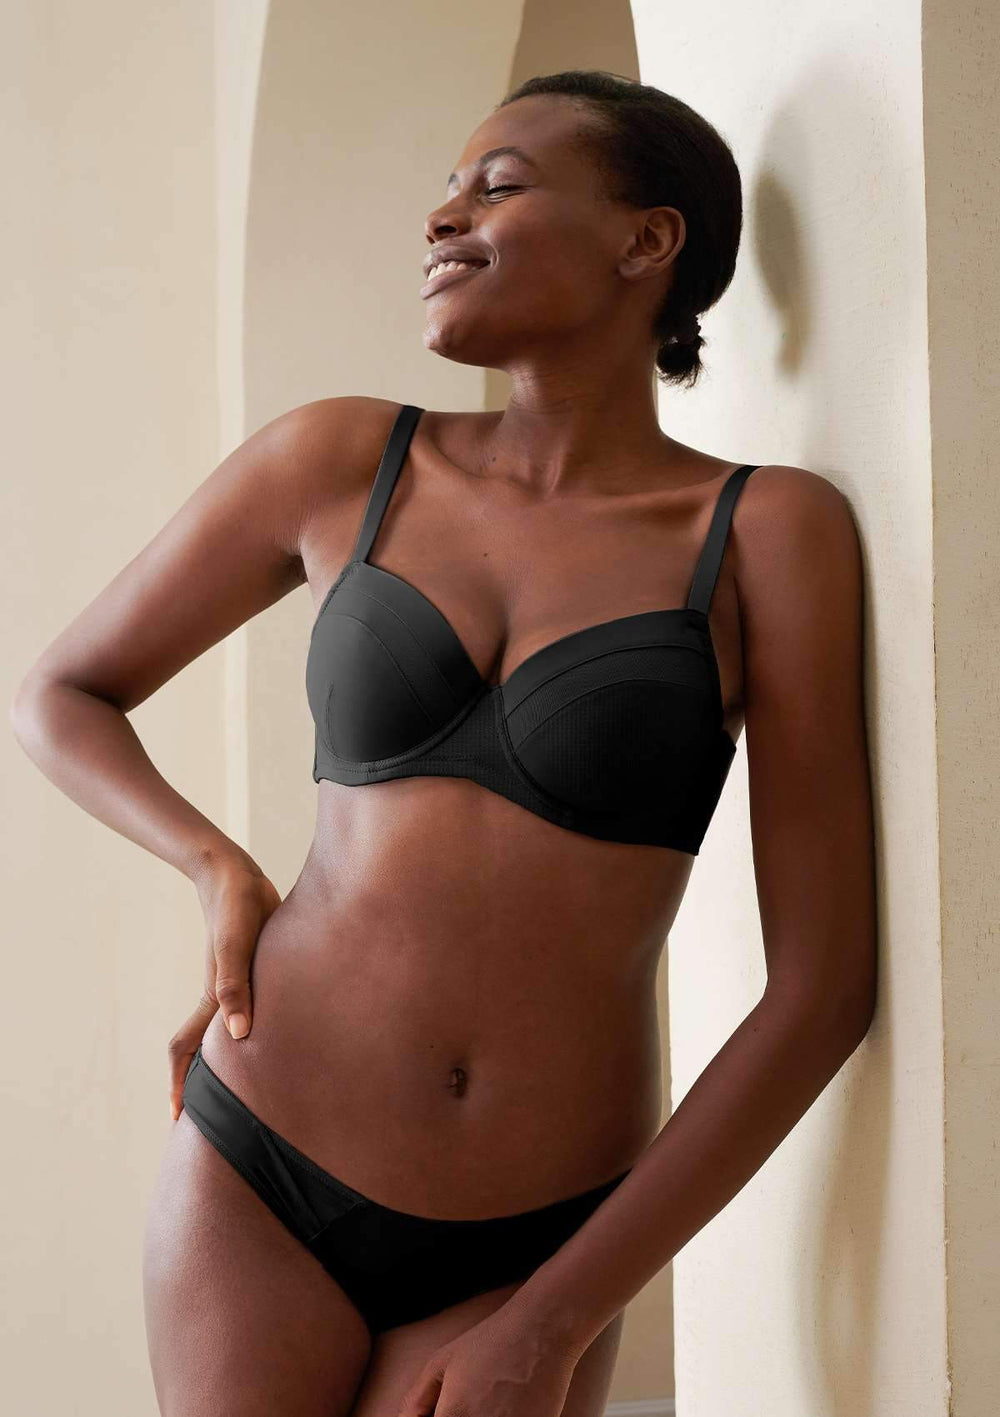 Buy ANTRIQ, Everyday Padded Bra with High Coverage